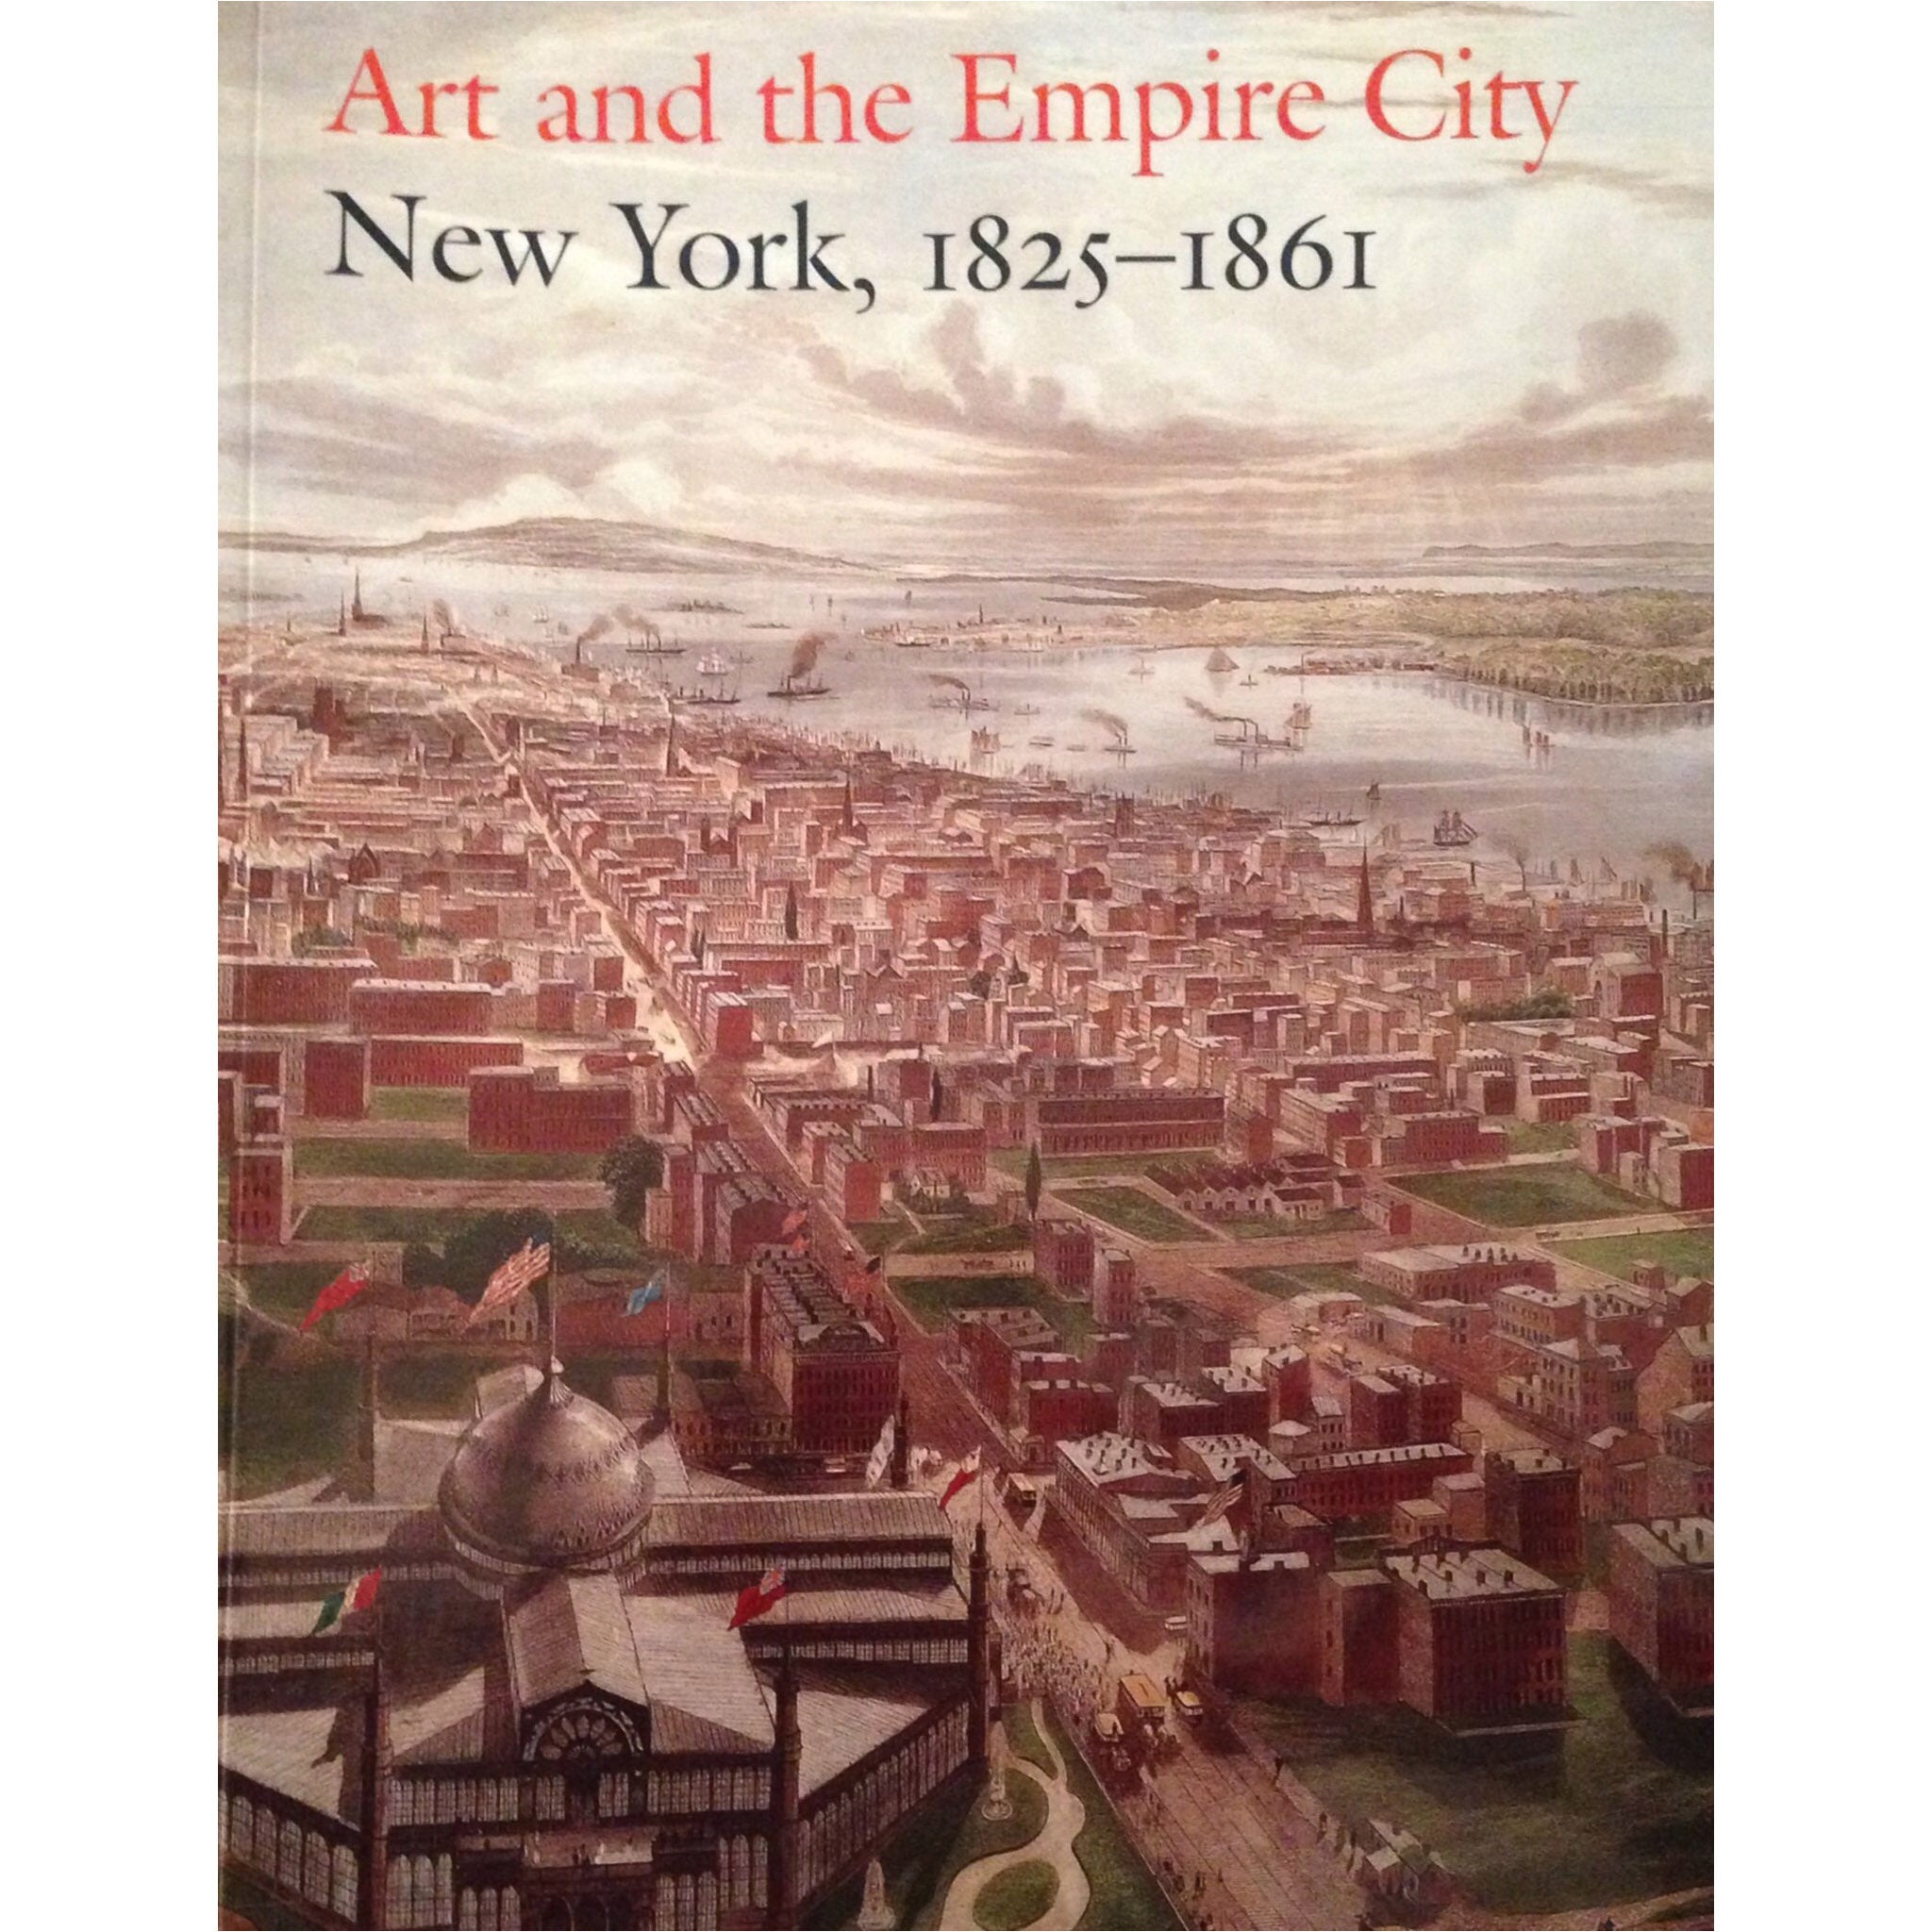 Art and the Empire City